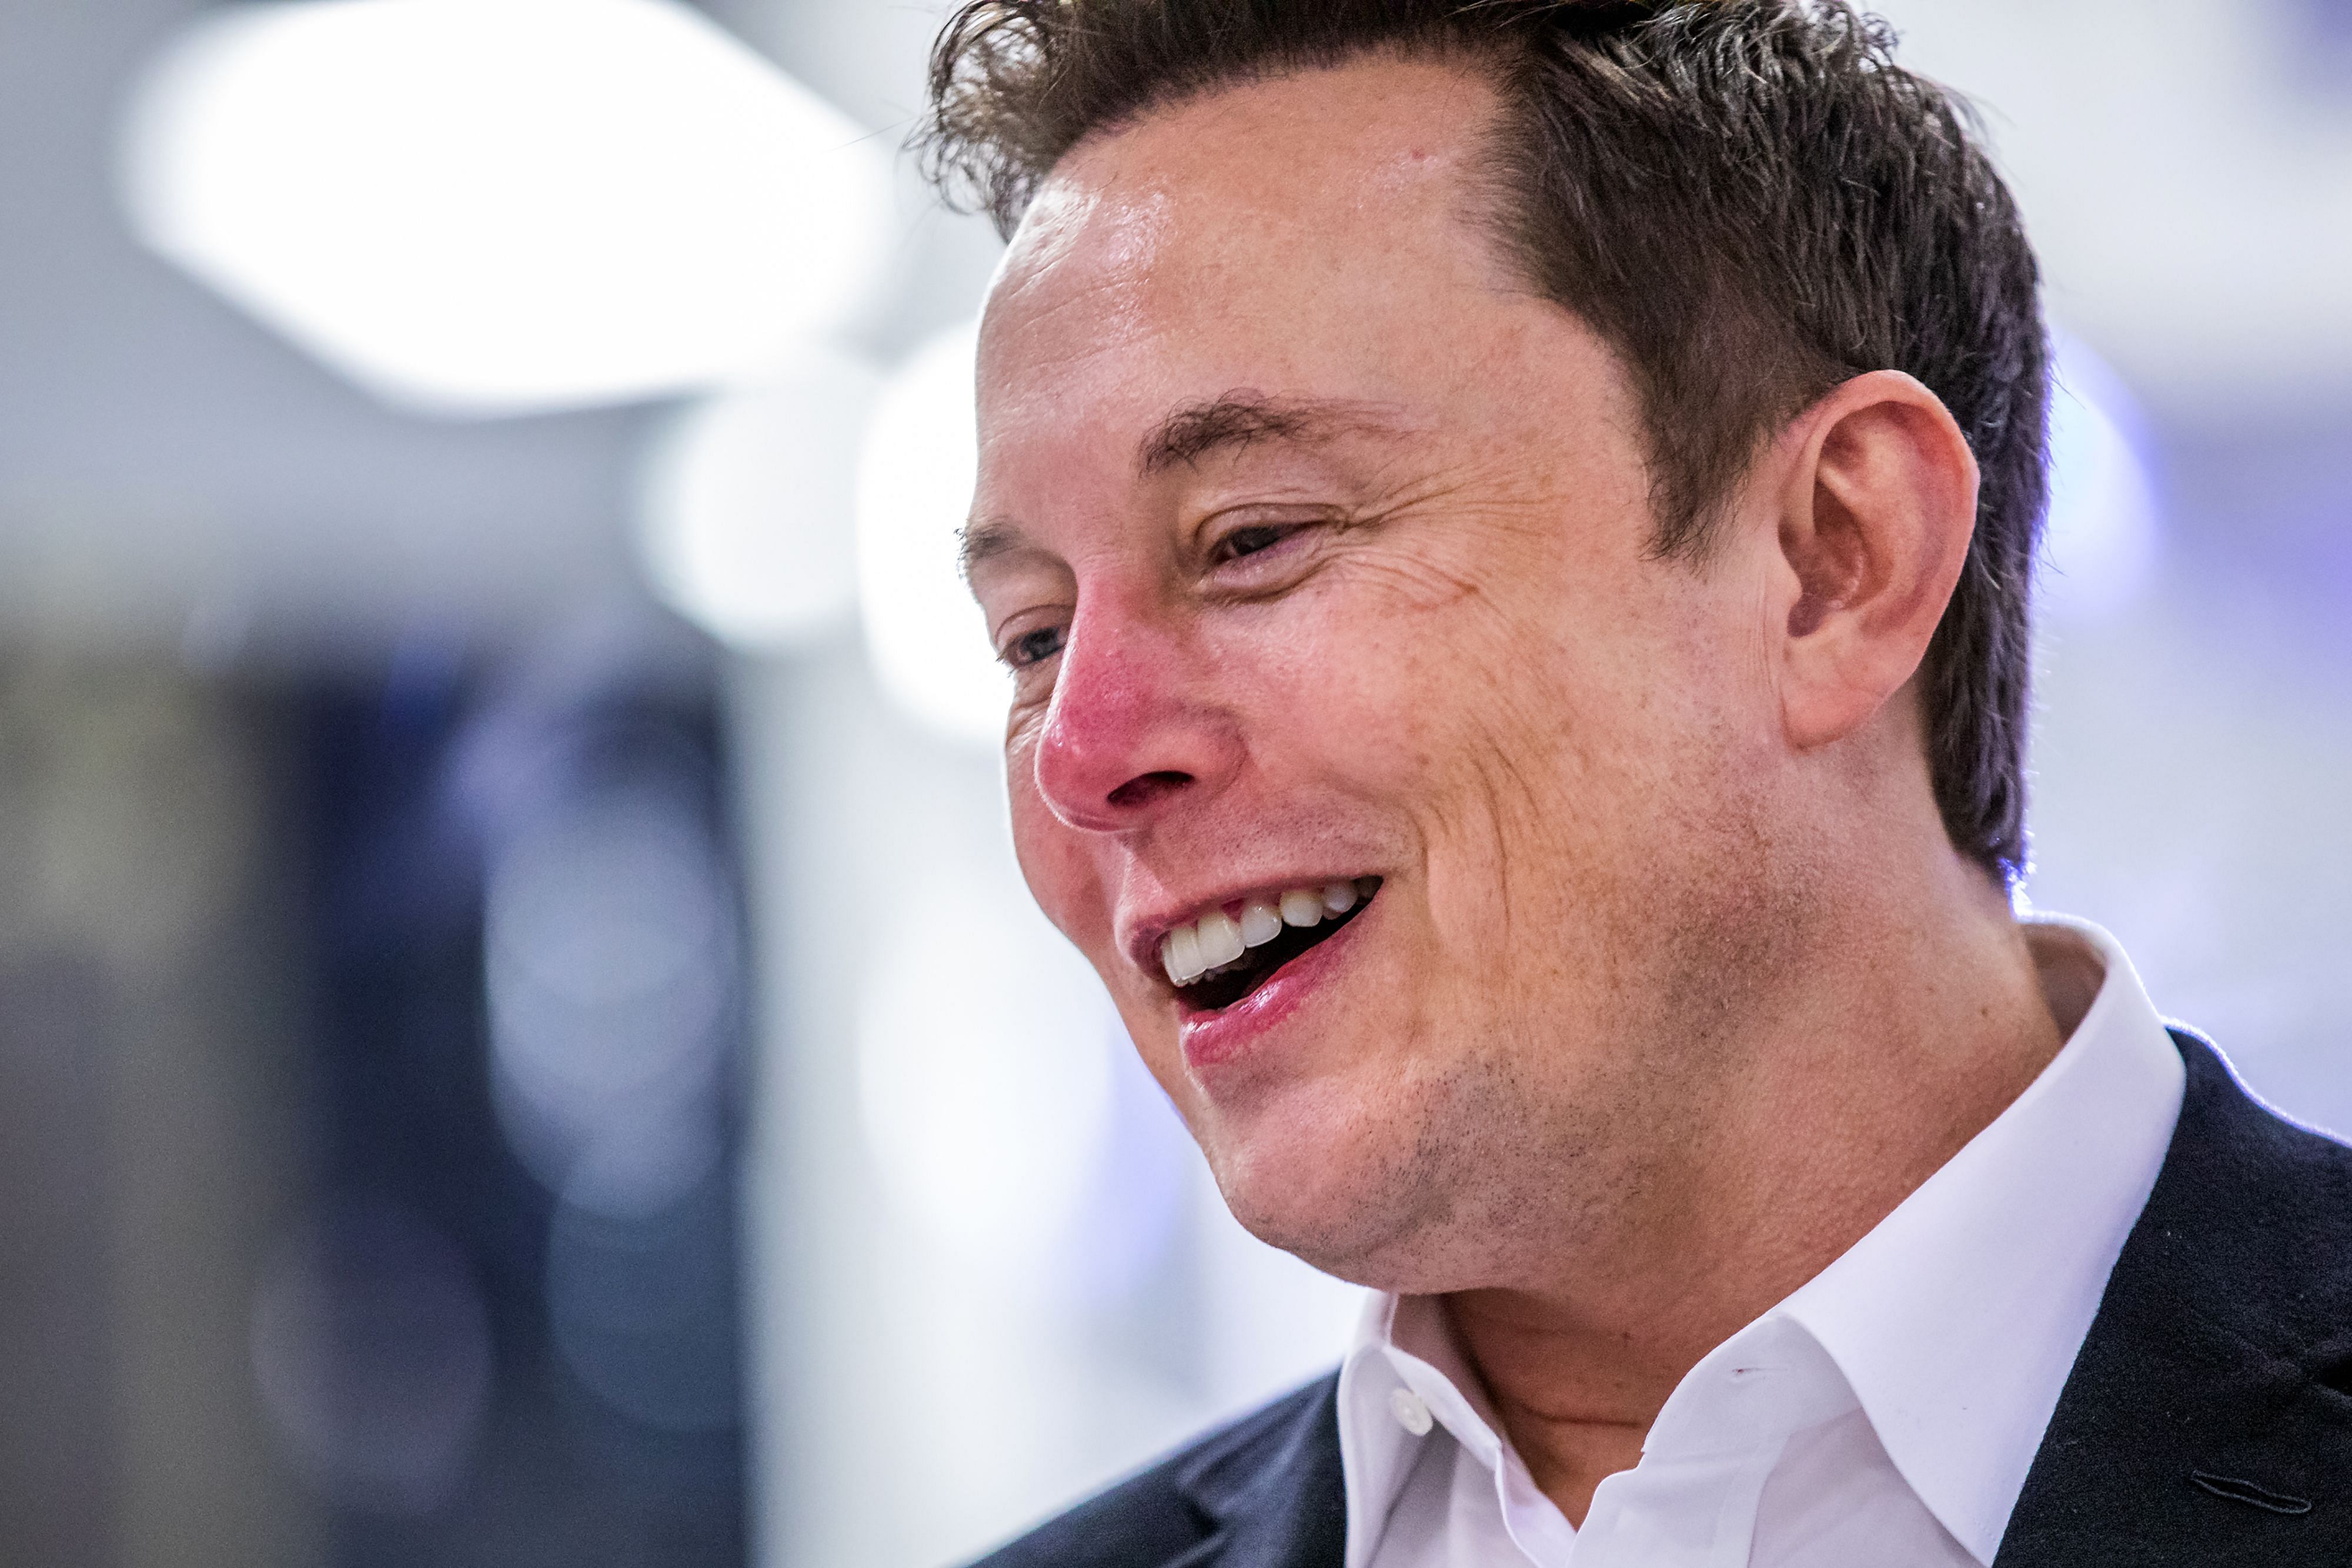 SpaceX founder Elon Musk. (AFP Photo)